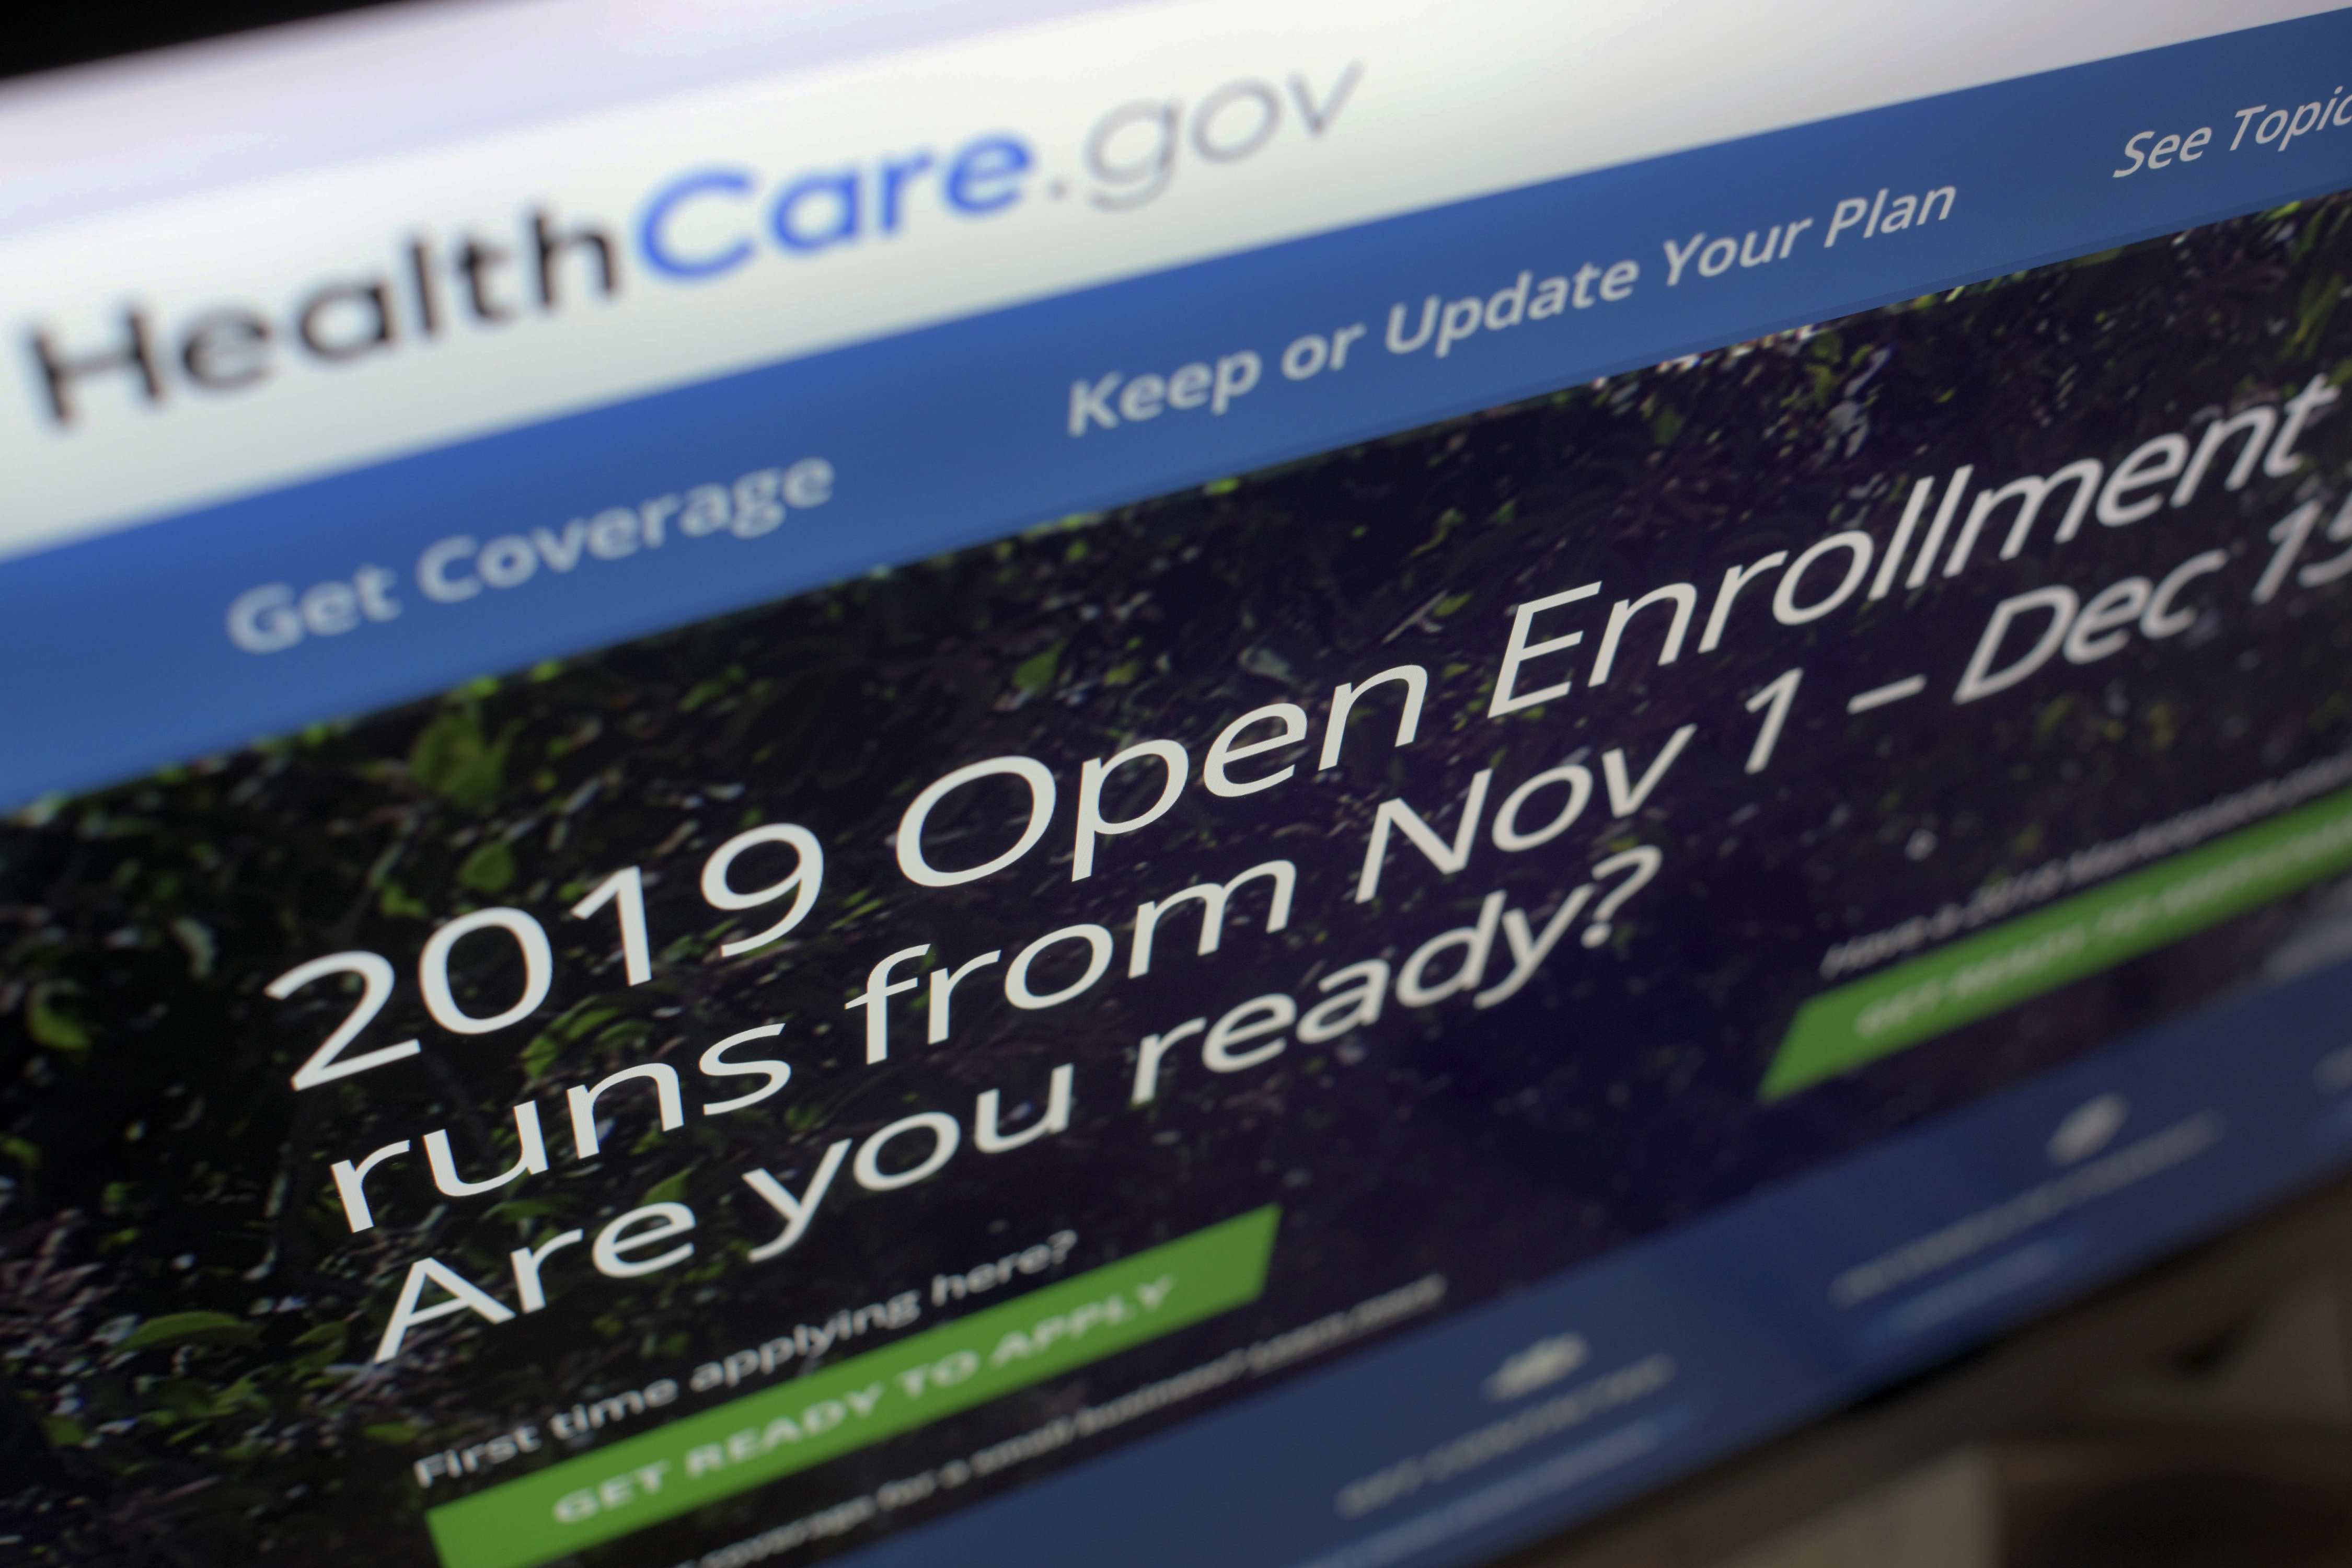 Health Insurance Exchange Enrollment Is Back. Here's What You Need To Know.